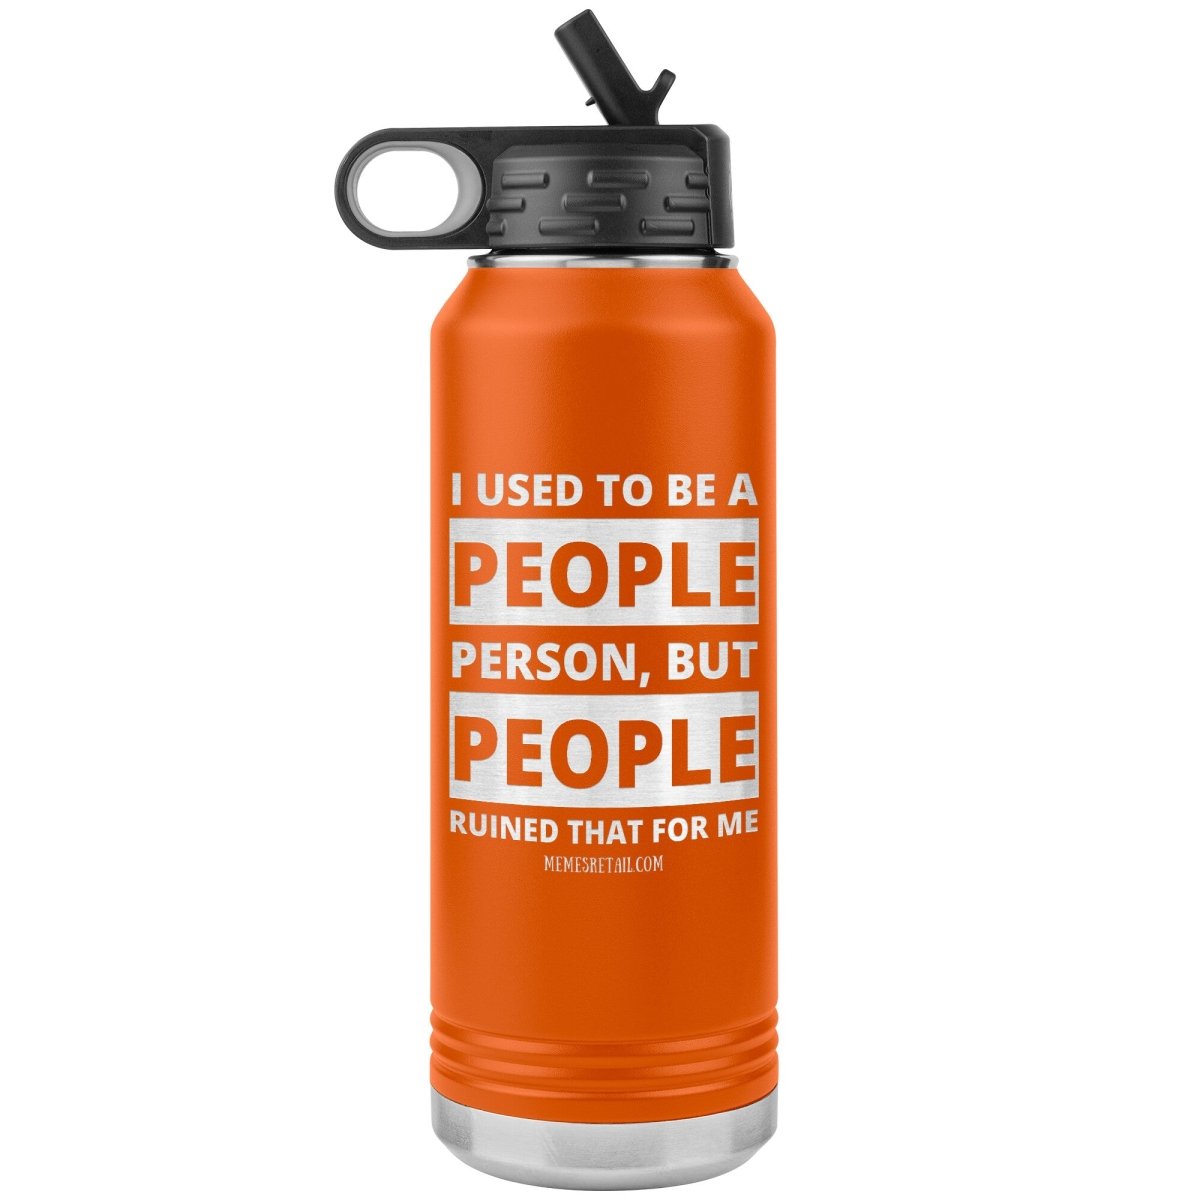 I Used To Be A People Person, But People Ruined That For Me 32 oz Water Tumbler, Orange - MemesRetail.com